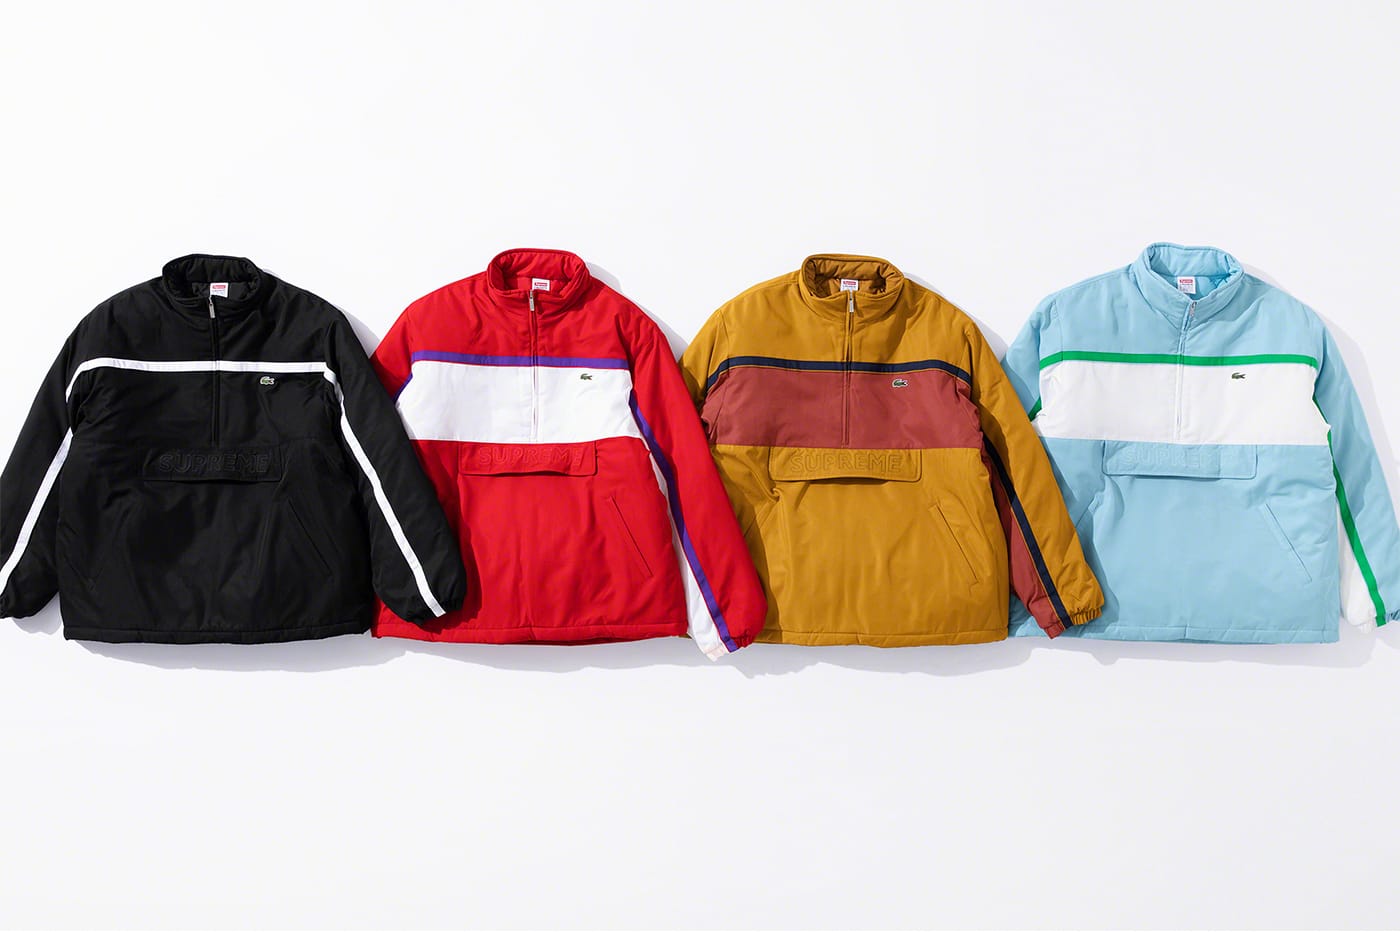 Supreme x Lacoste Fall 2019 Collection 